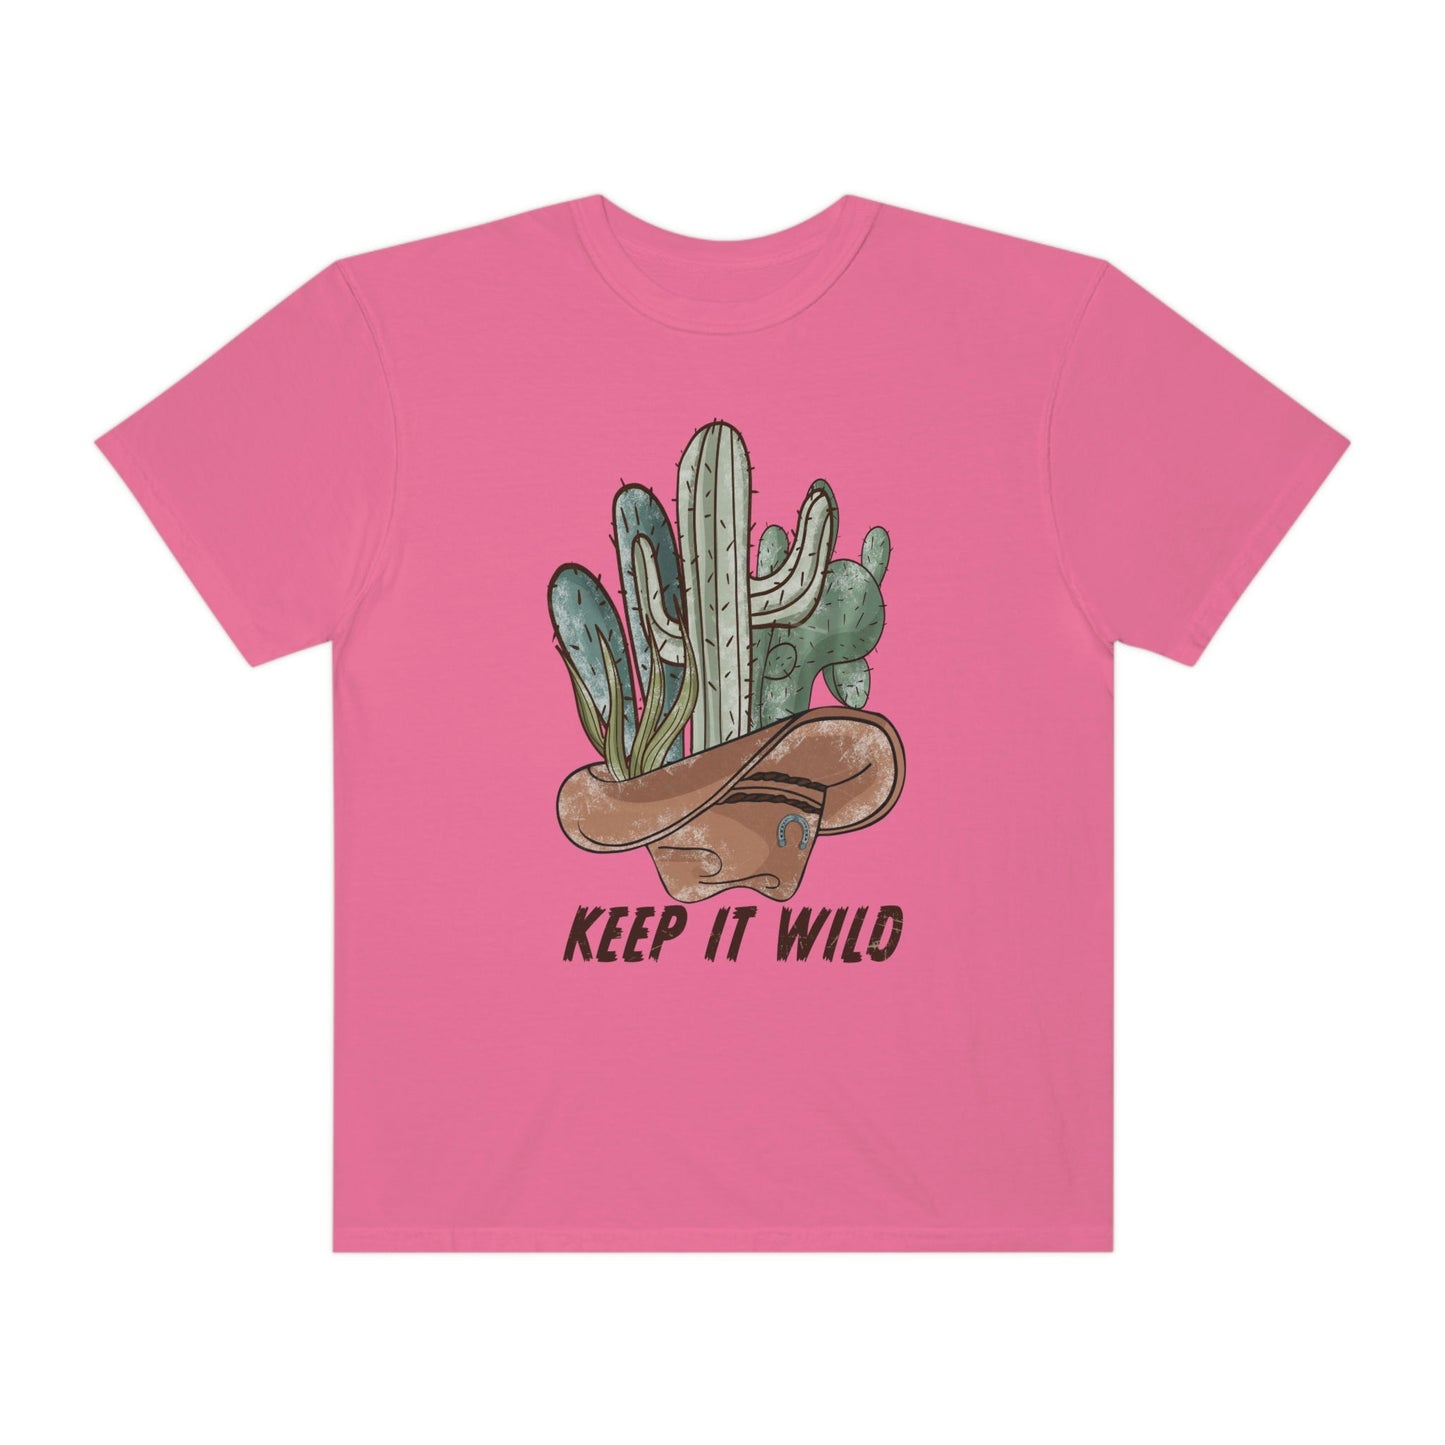 Keep It Wild Cactus Shirt, Comfort Colors Funny Western Graphic Tee | Cowgirl T-Shirt